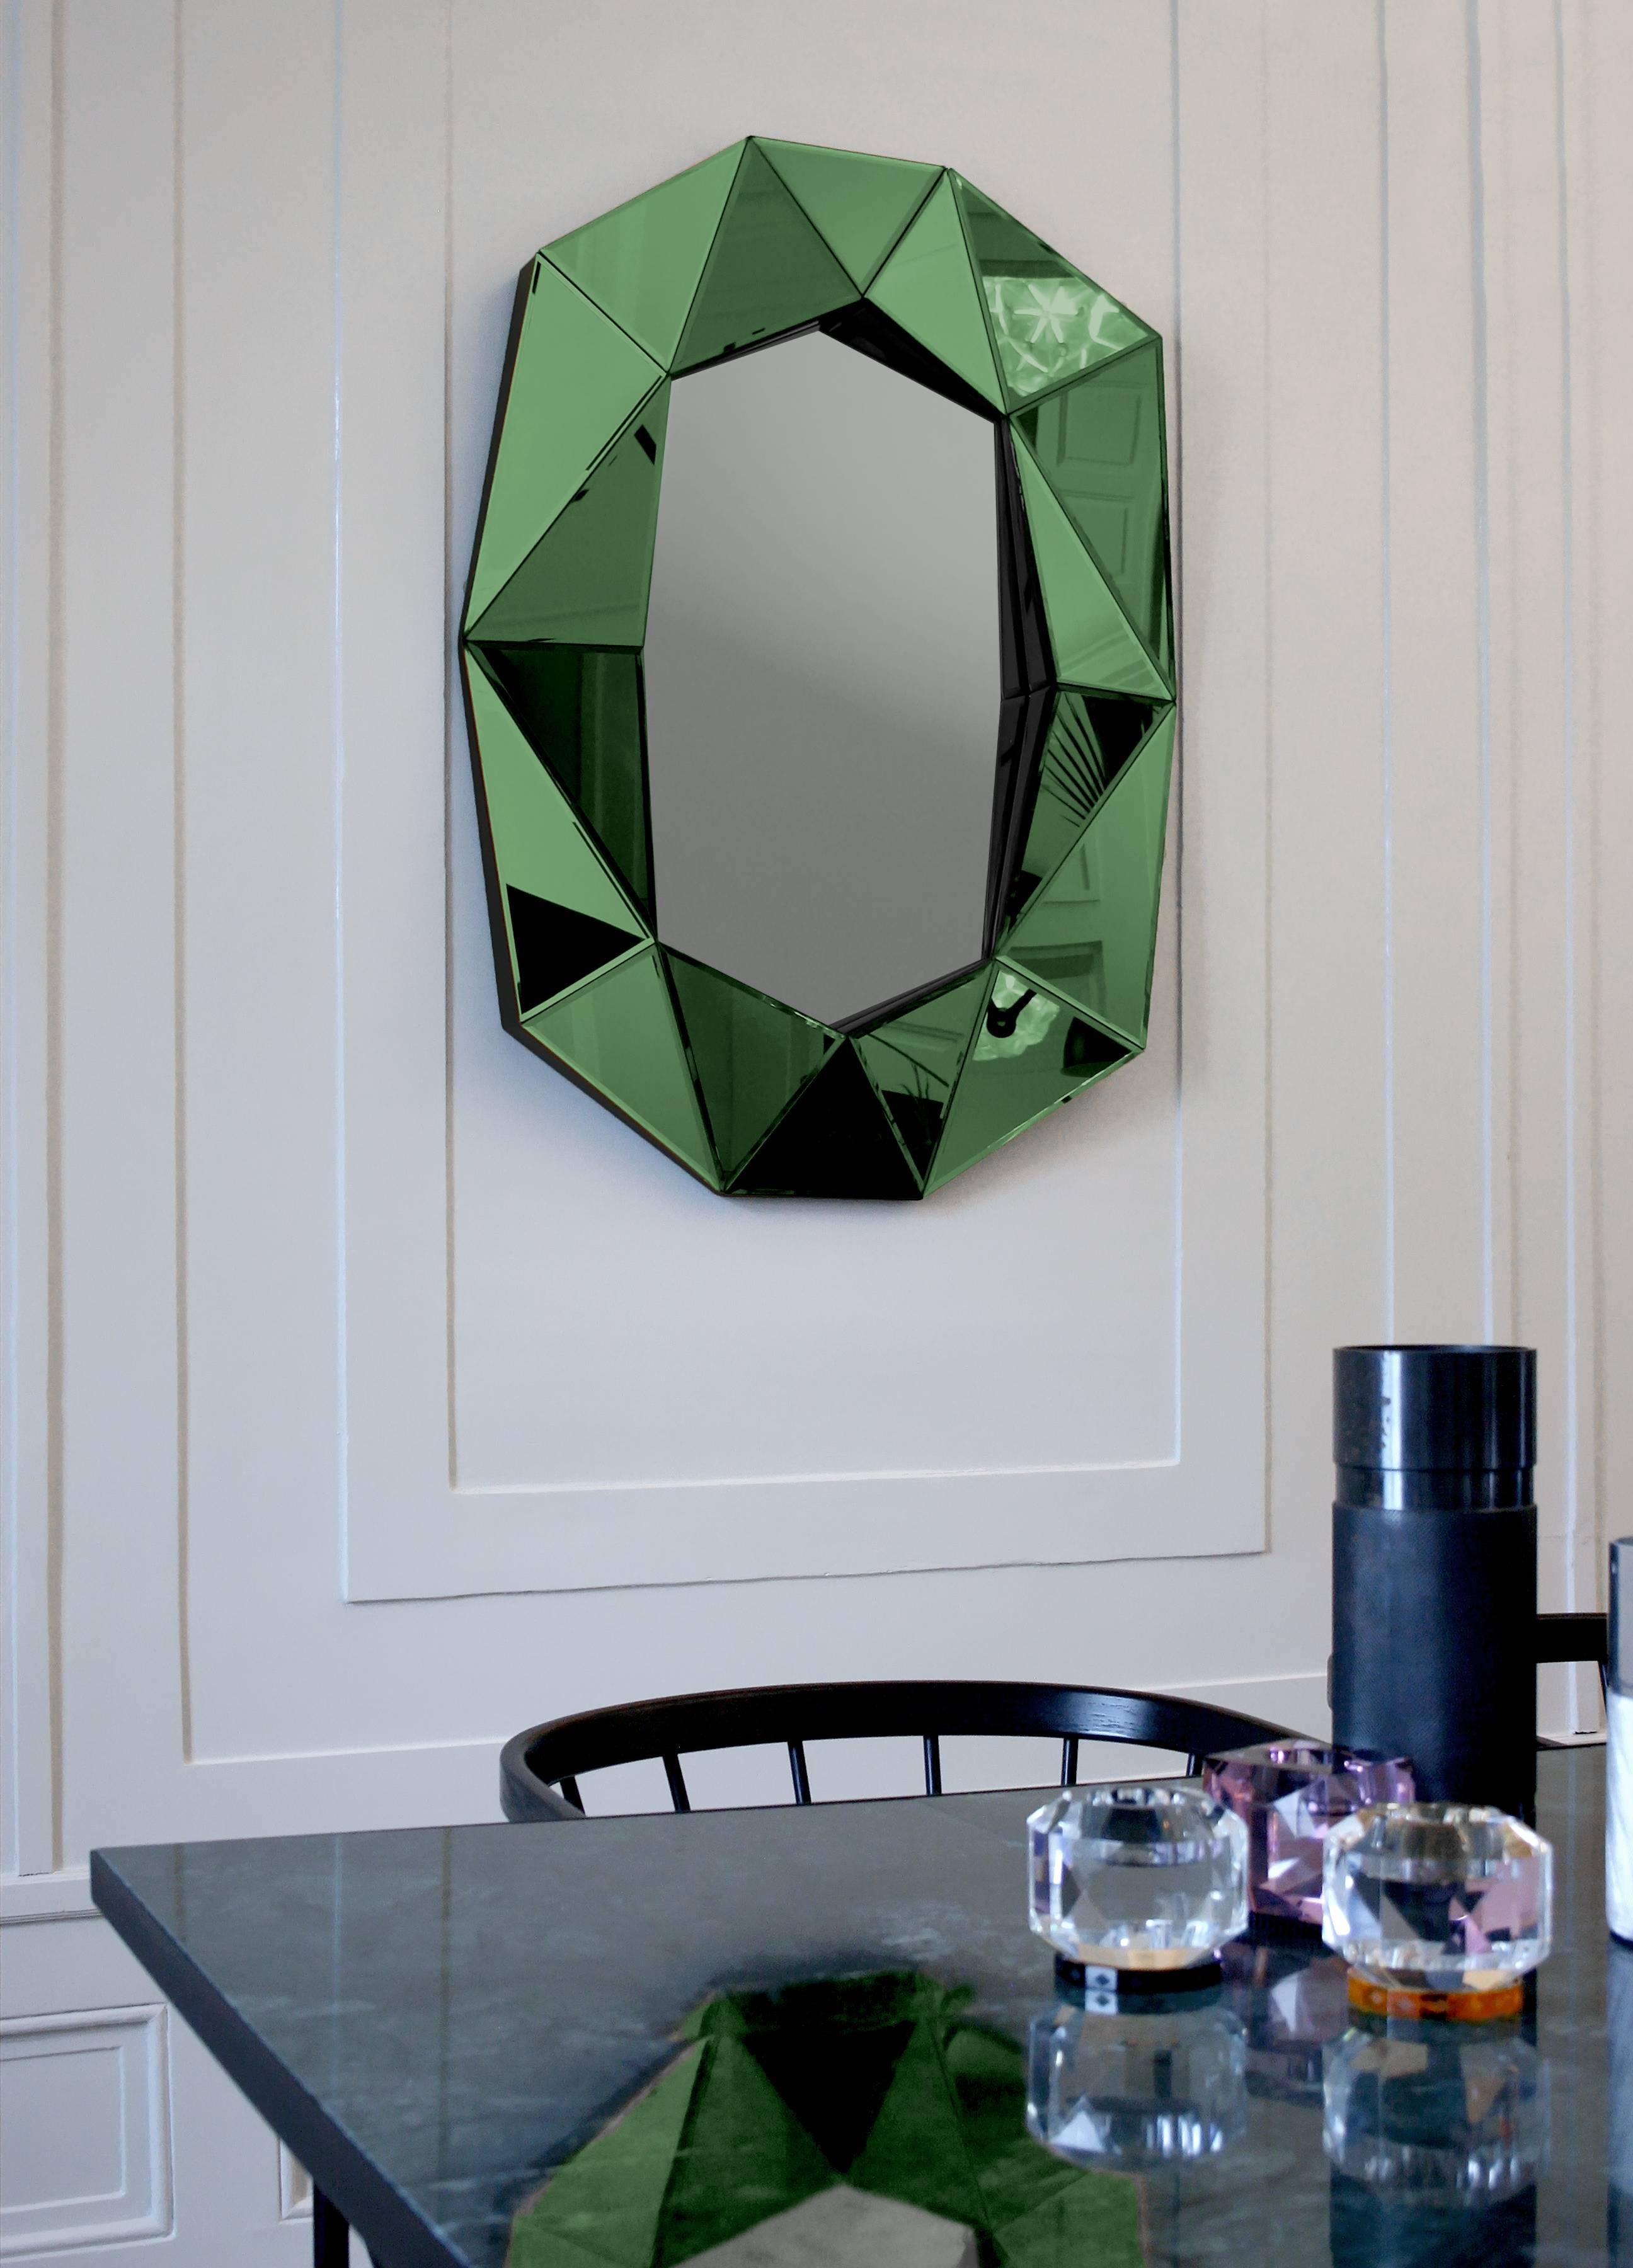 Diamond decorative mirror
Mirror
4mm faceted mirror on black painted mdf
Measures: L 72 x H 100 x D 6.2cm

The luxury handcrafted diamond mirror large is a dazzling, unique, Art Deco inspired mirror. It will add the perfect expression of